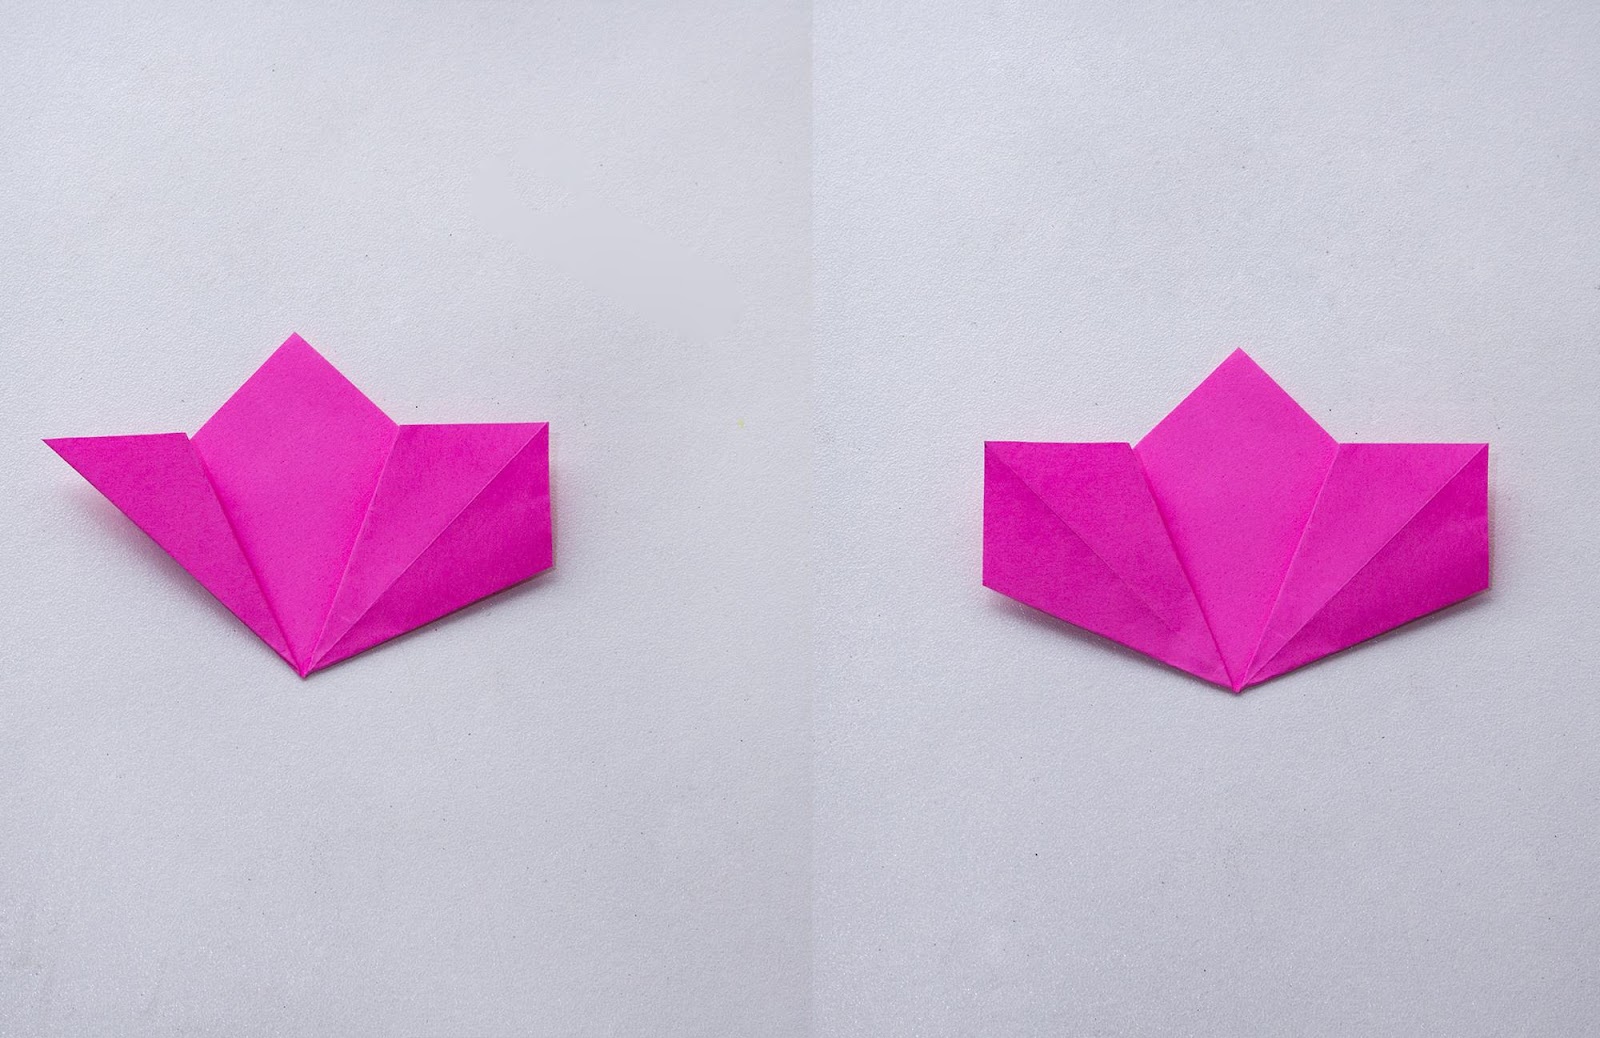 Left: The left edge of a pink paper is folded up
Right: The left edge is folded back down with new crease